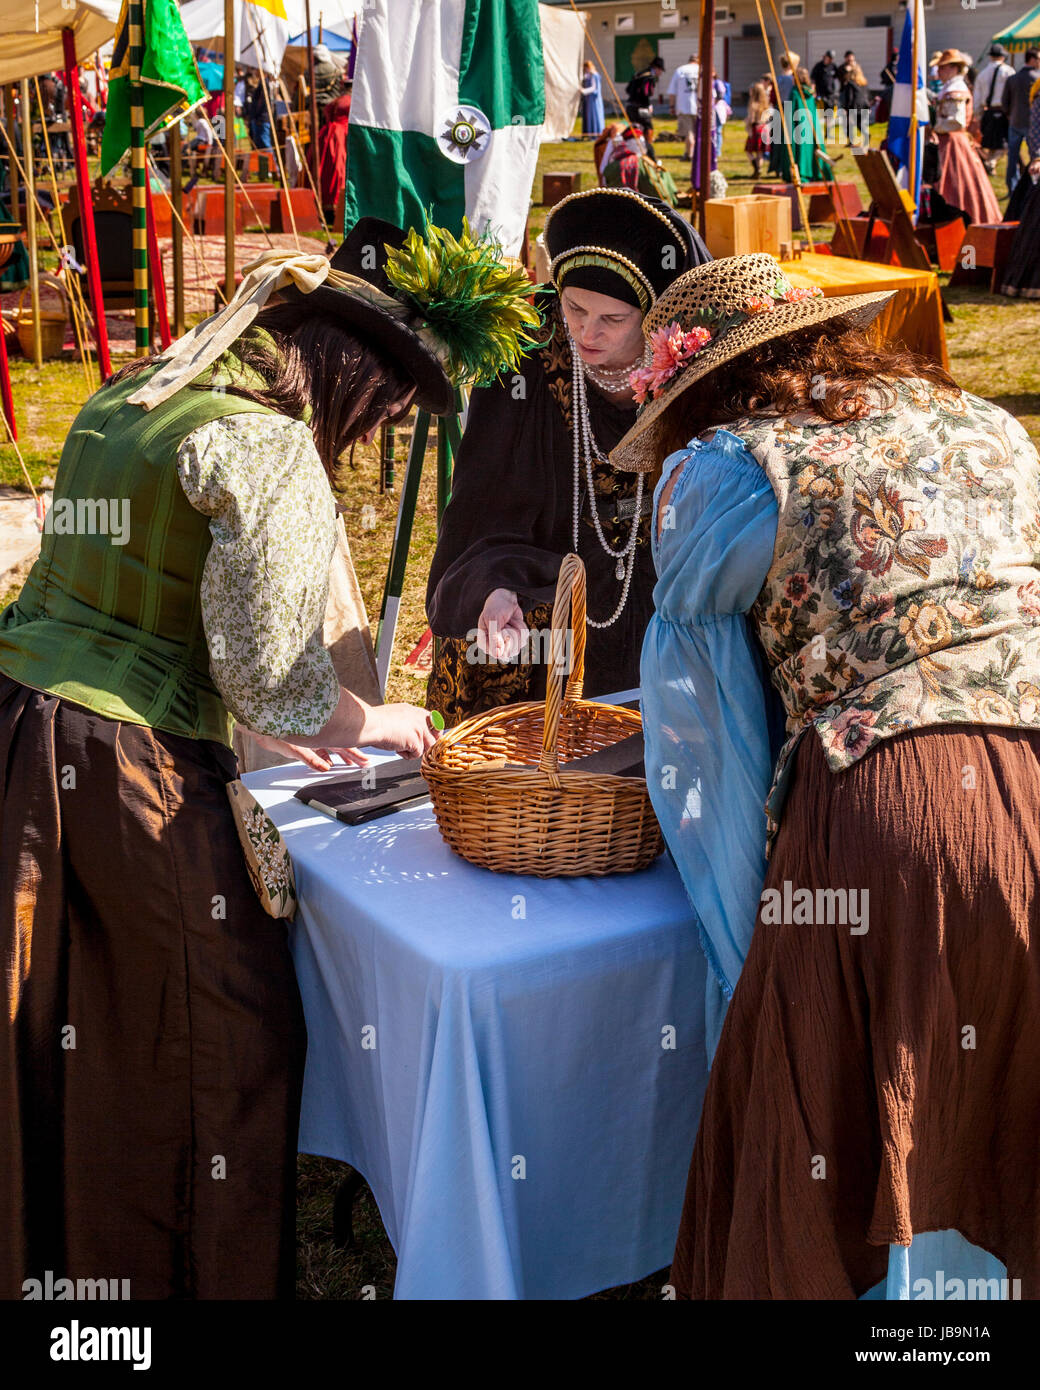 scenes-from-the-sonora-california-celtic-faire-in-2011-JB9N1A.jpg